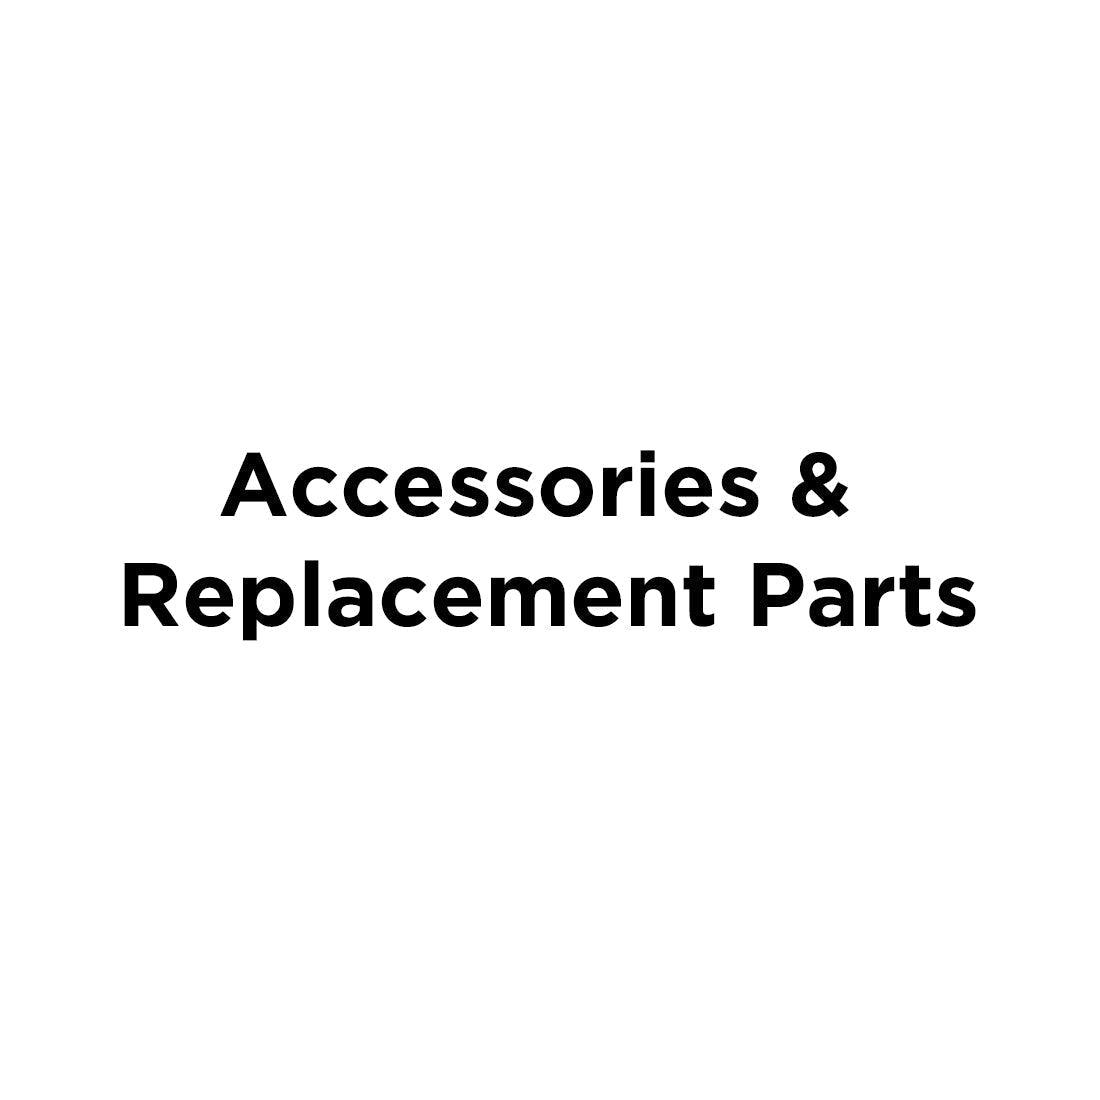 Litheli Accessories & Replacement Parts for Litheli Products Only (Contact Litheli Customer Service First)